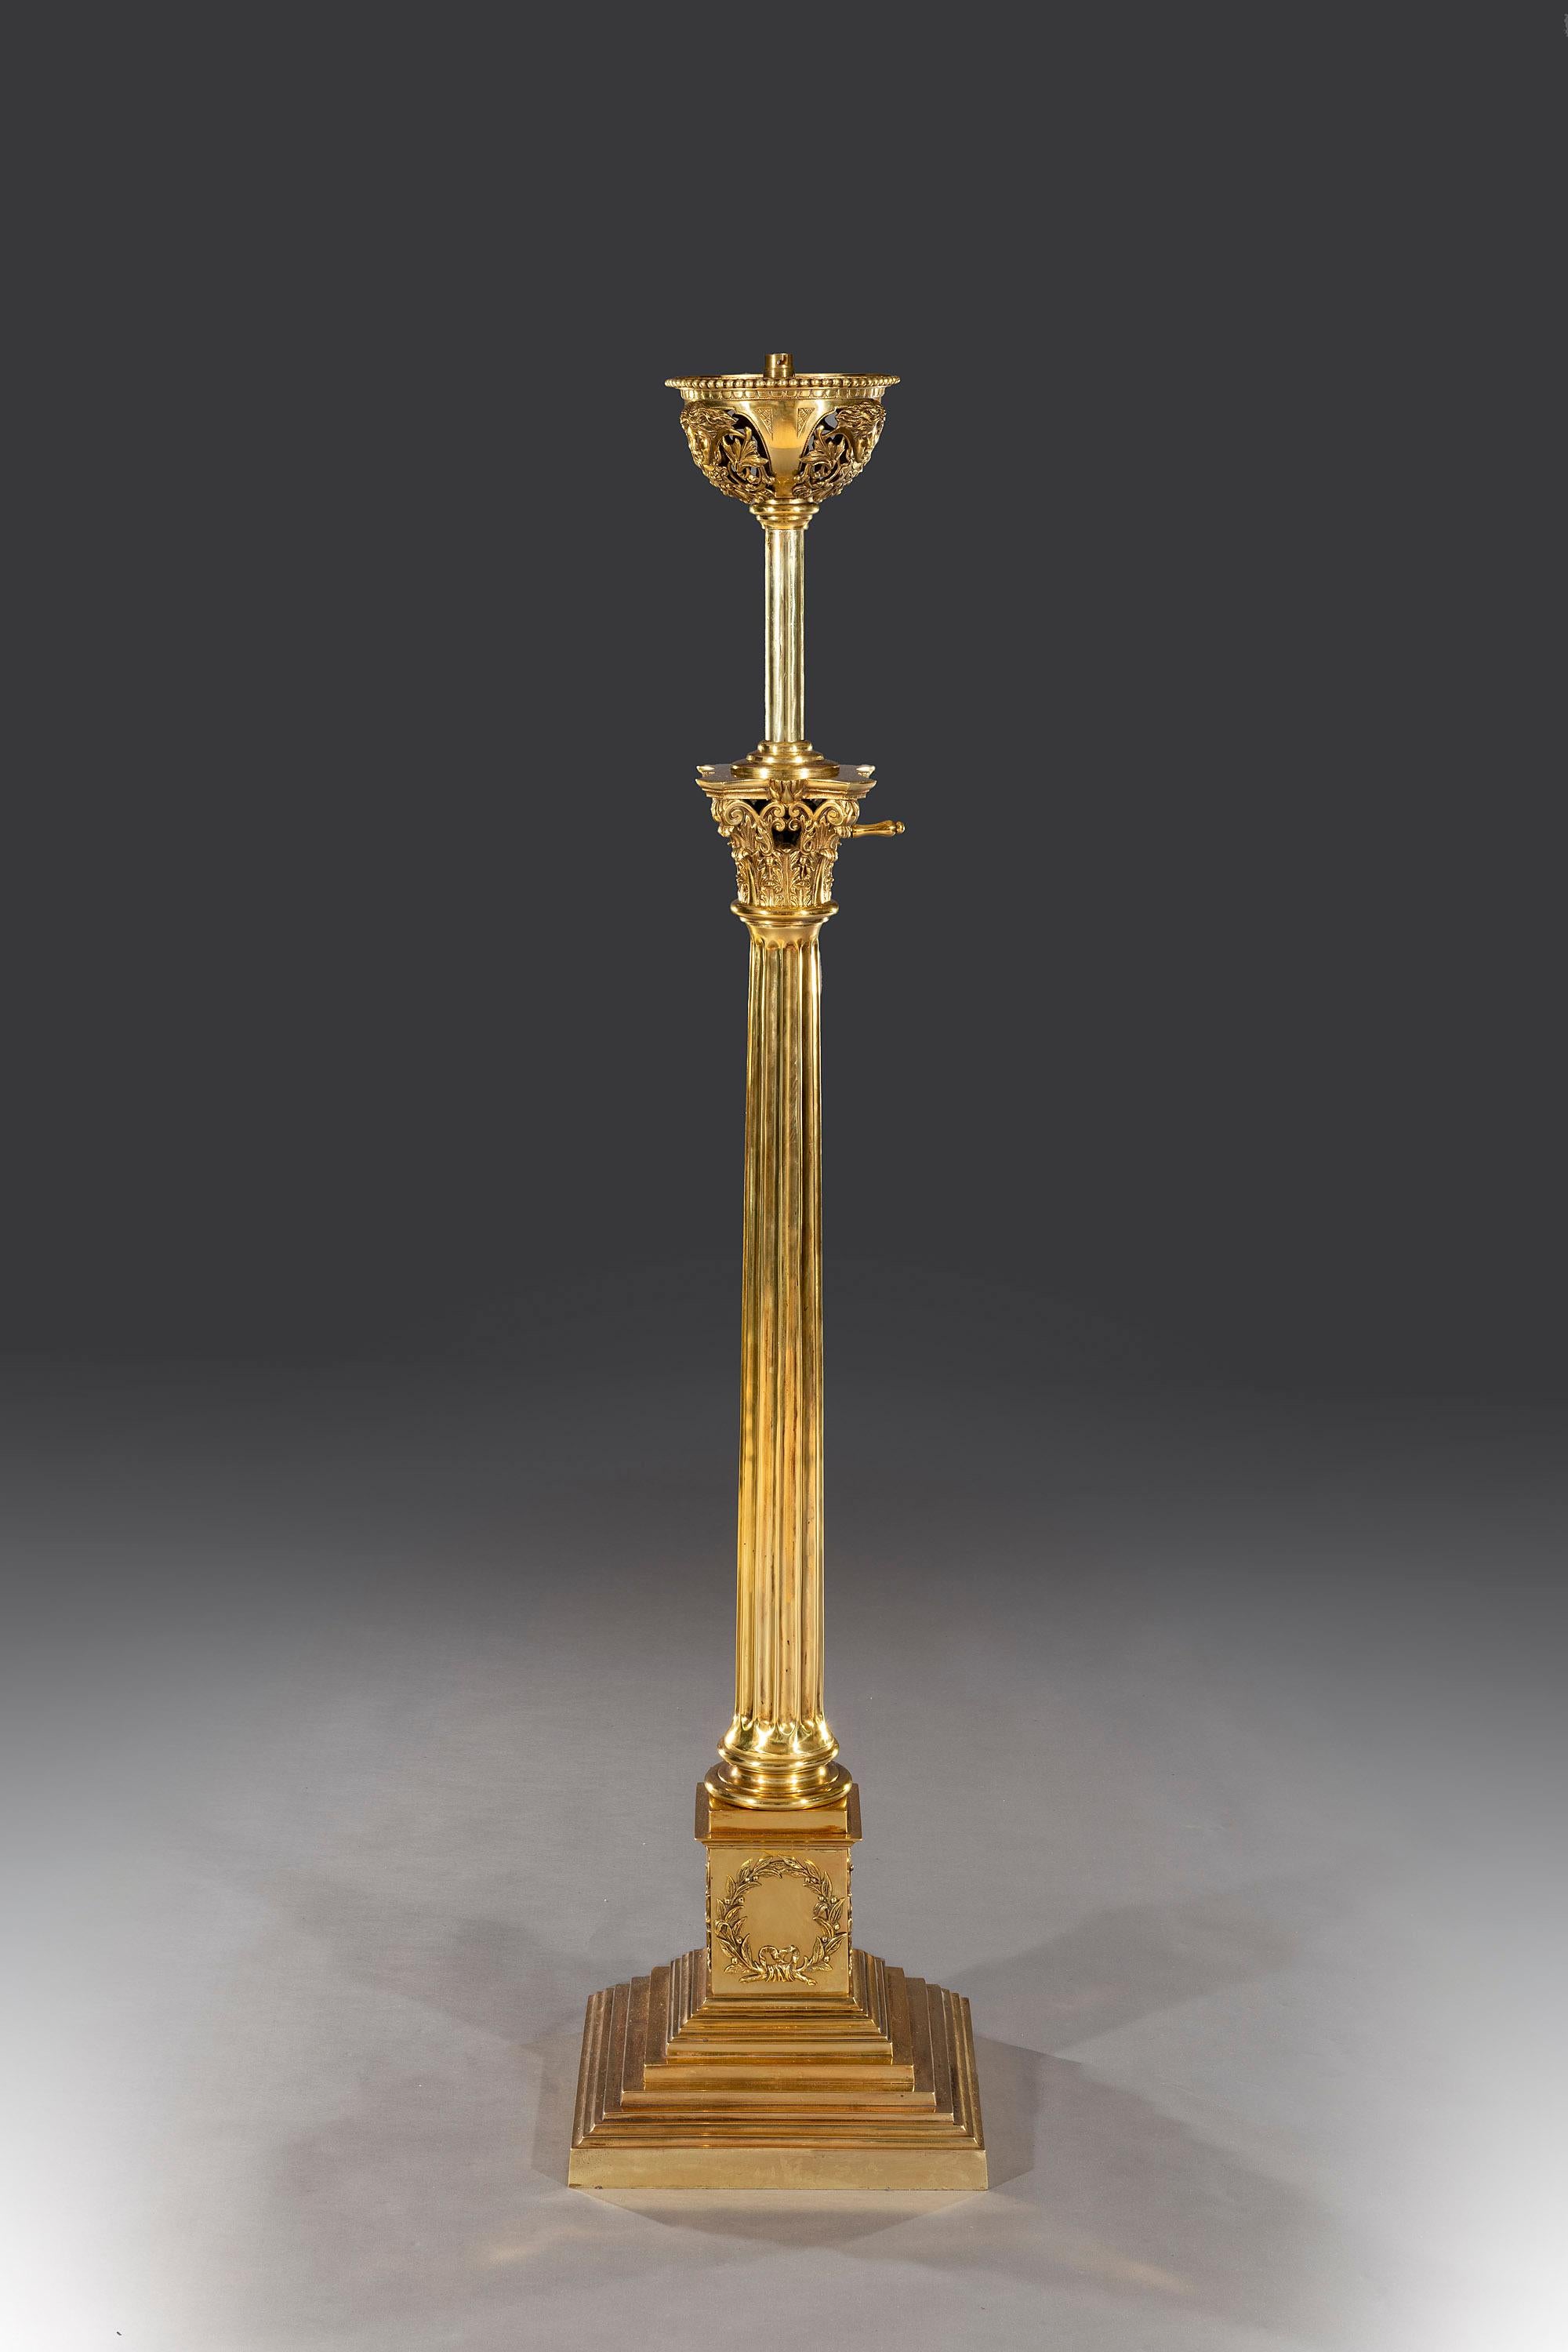 The telescopic lamp is of the finest casting and is crisp throughout with the telescopic level located at the top of the column within the capital. The brass lamp is almost certainly a one off as its statue is bold and powerful.